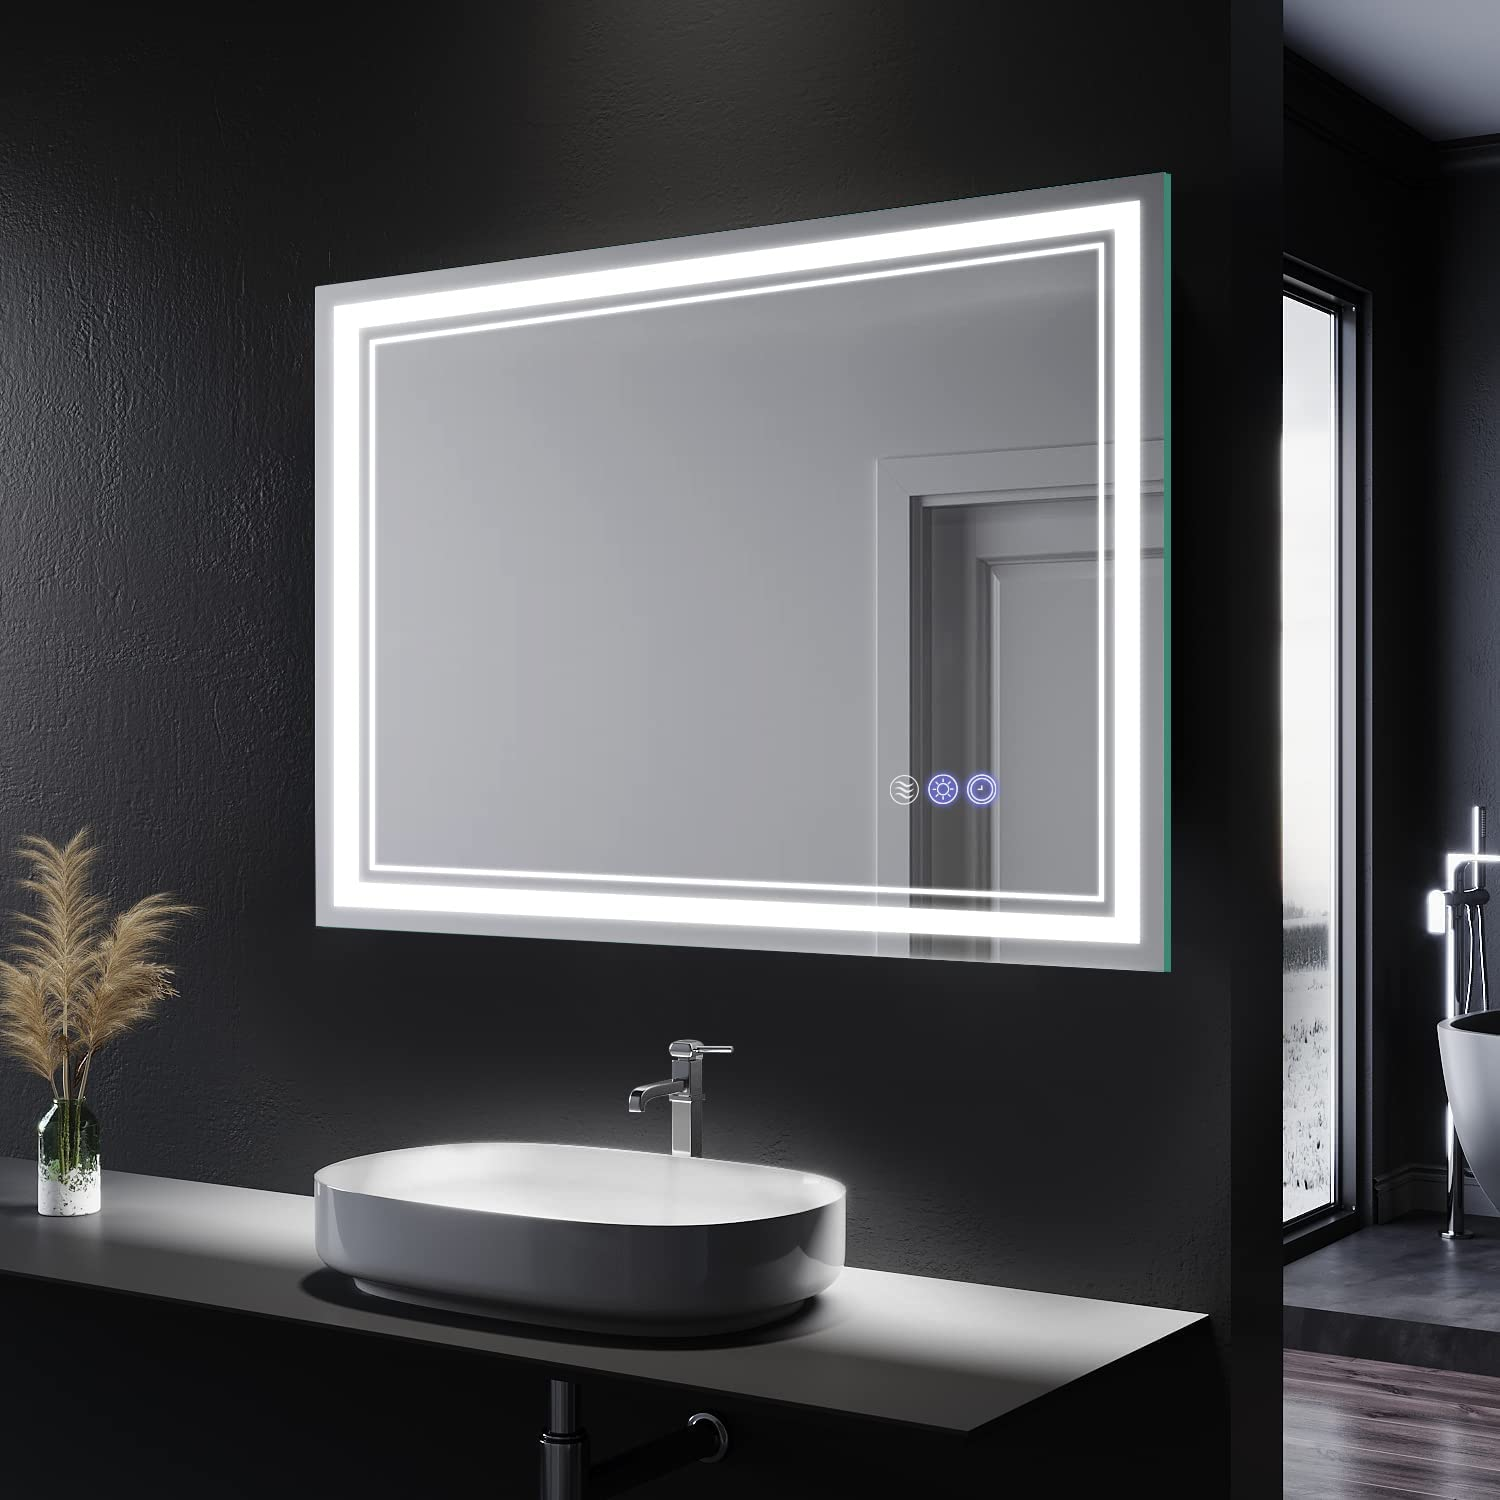 Is it necessary to buy LED mirrors